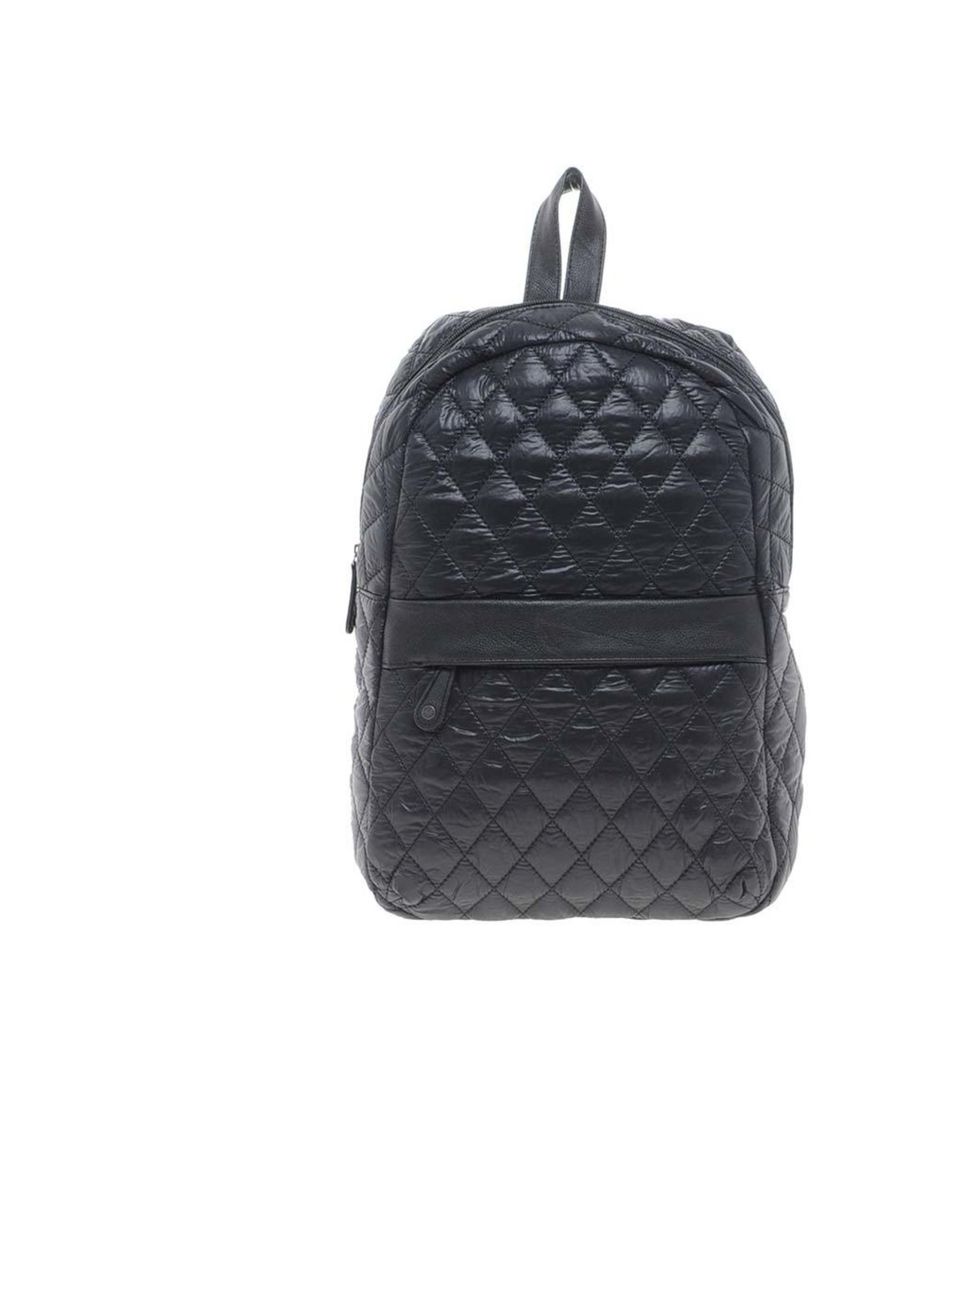 <p>A rucksack is great for carrying around all your summer essentials; there's even room for a picnic blanket! This quilted style is a sleeker alternative to classic cotton... Pieces rucksack, £42 at <a href="http://www.asos.com/Pieces/Pieces-Milje-Quilte